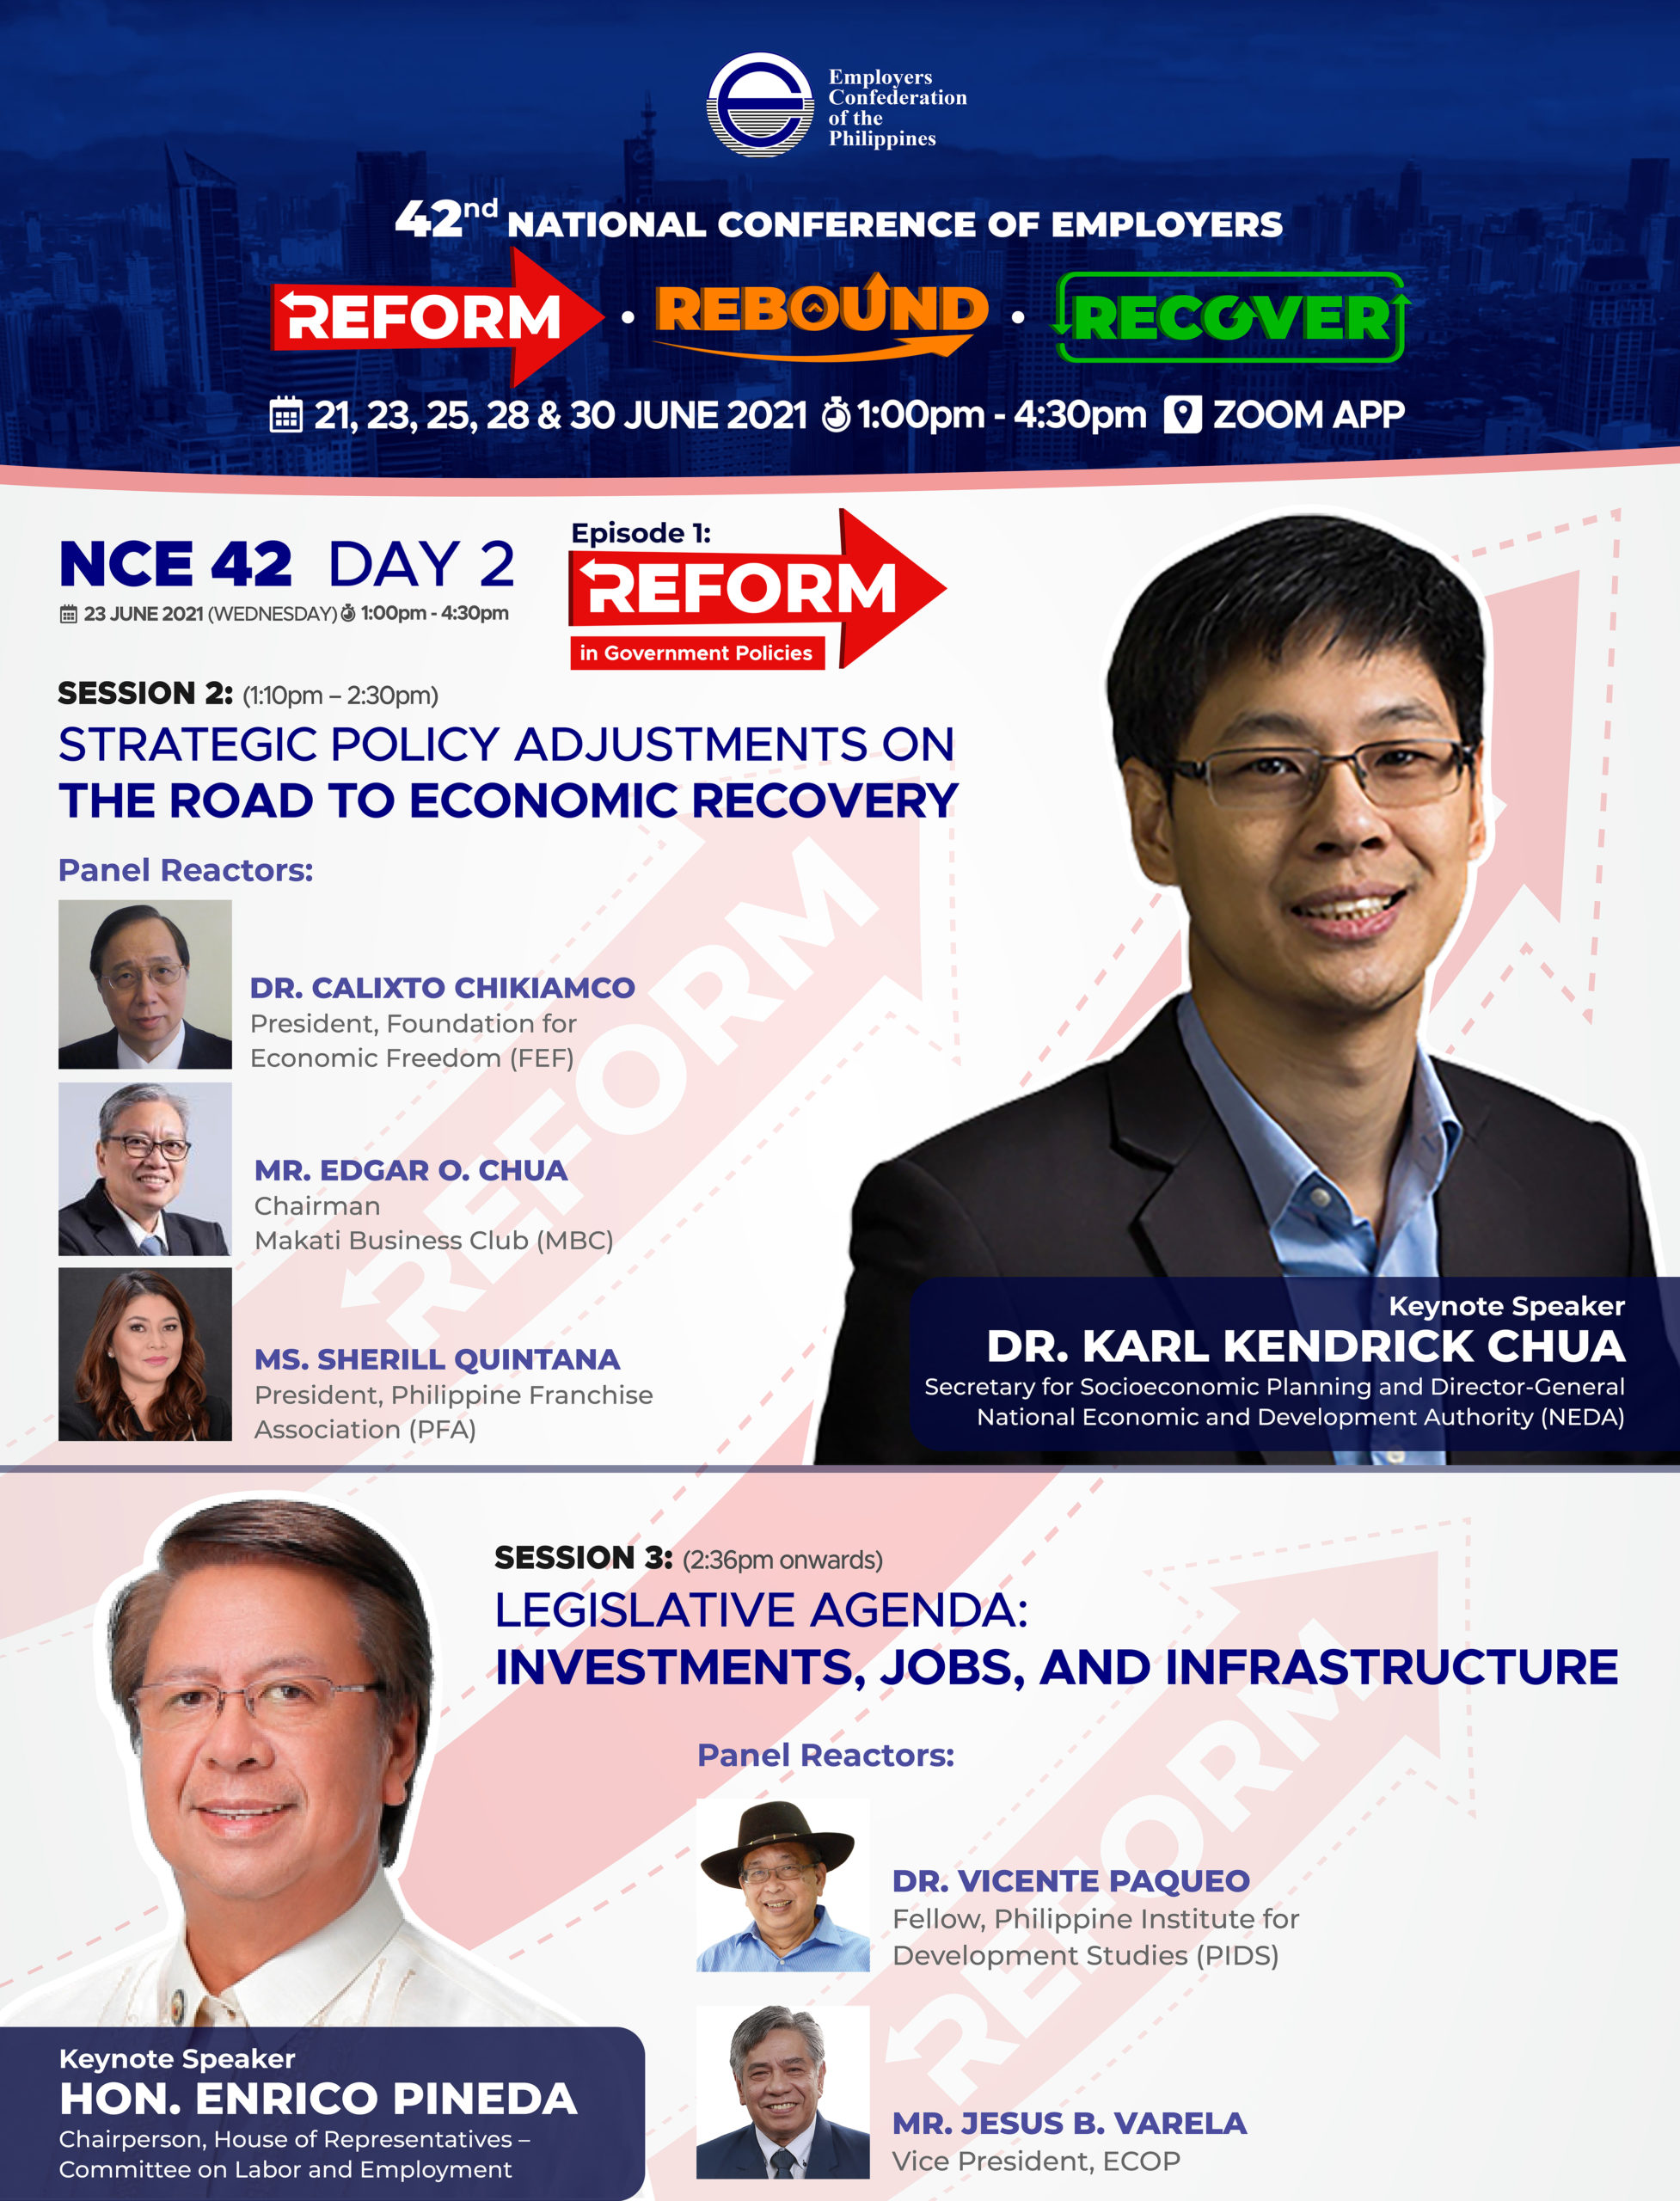 NCE42 Day 2 - Session 2 & Session 3